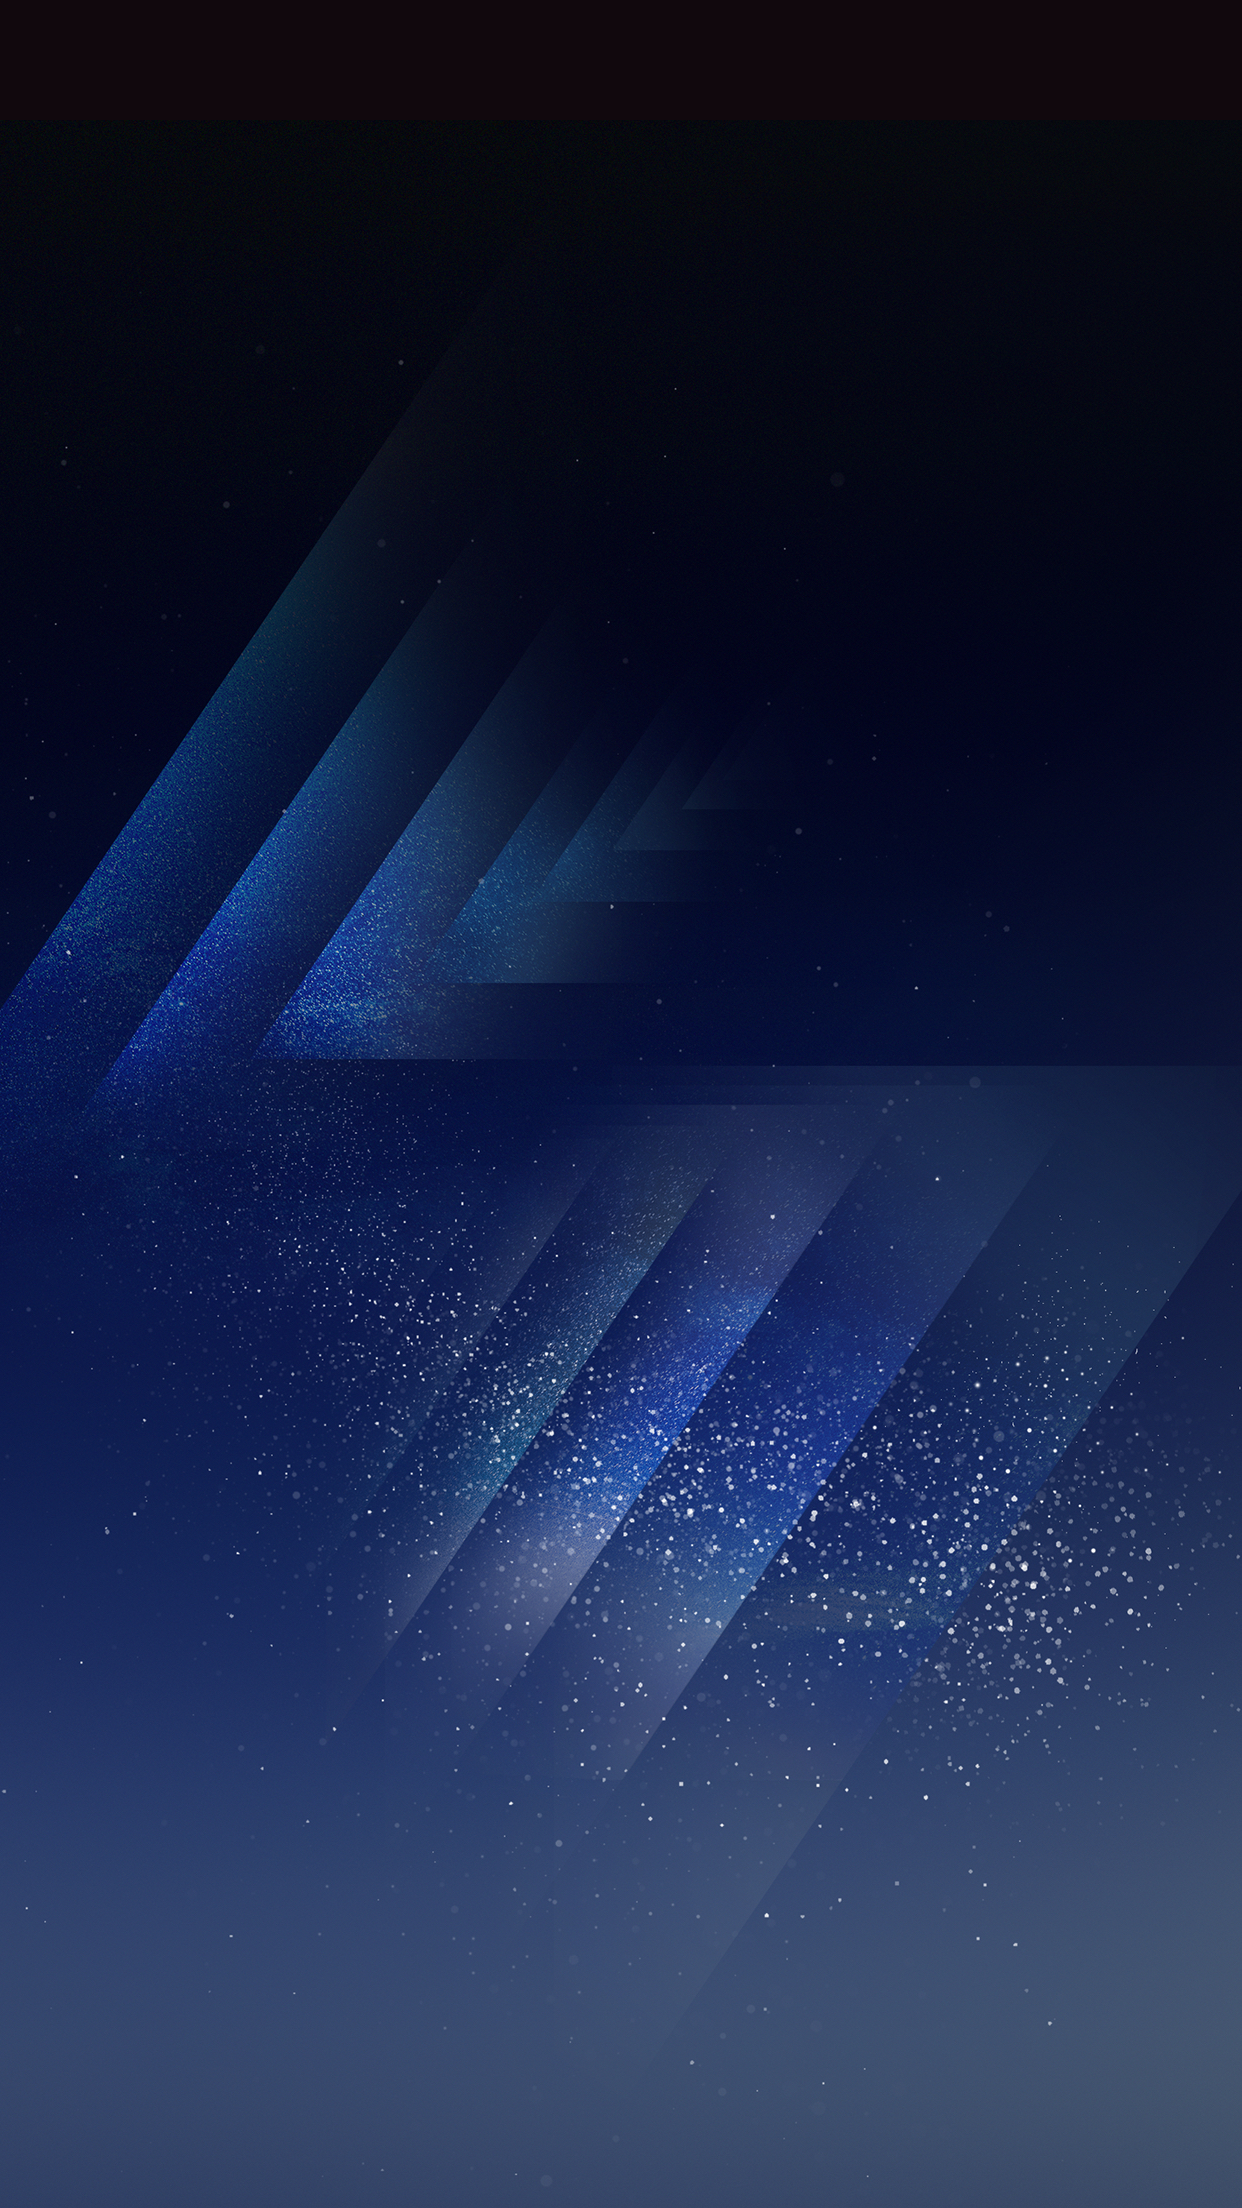 Samsung S8 Wallpapers